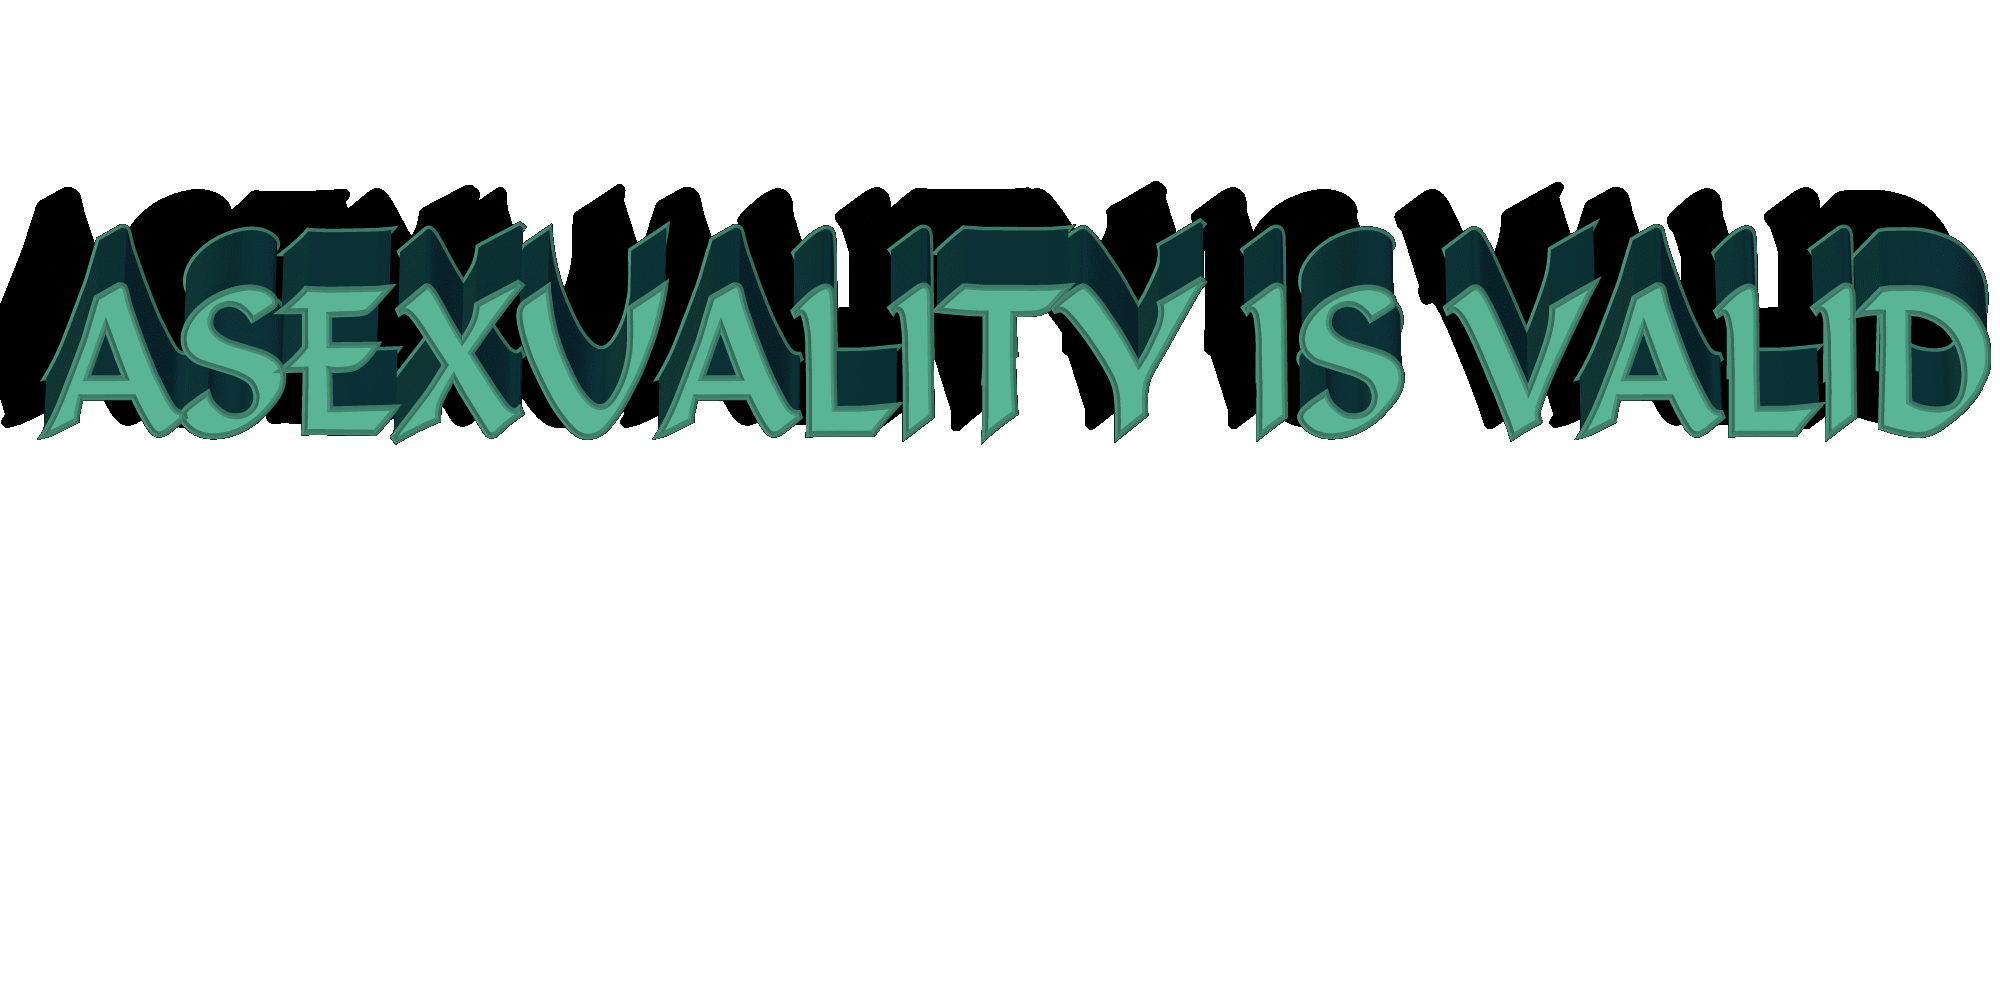 ASEXUALITY IS VALID